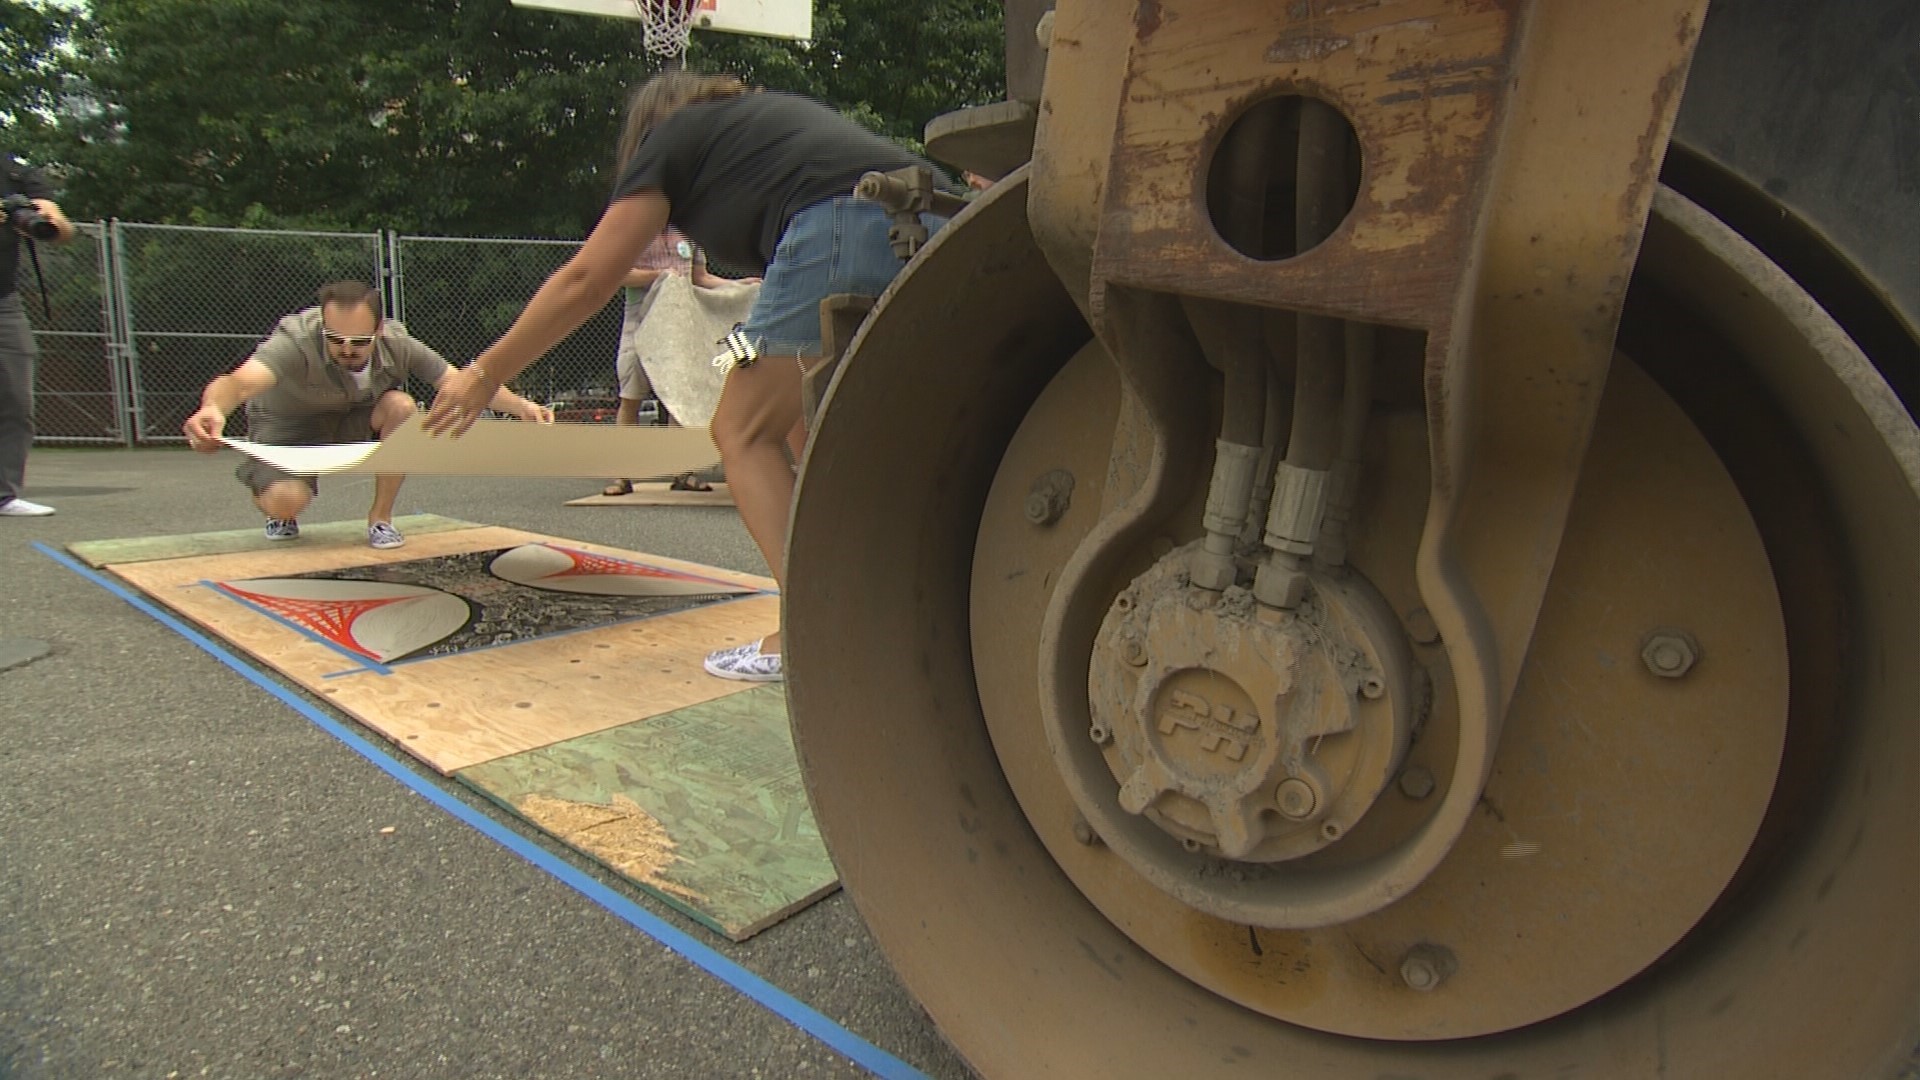 Teams of artists use heavy steamrollers to press colorful art prints.